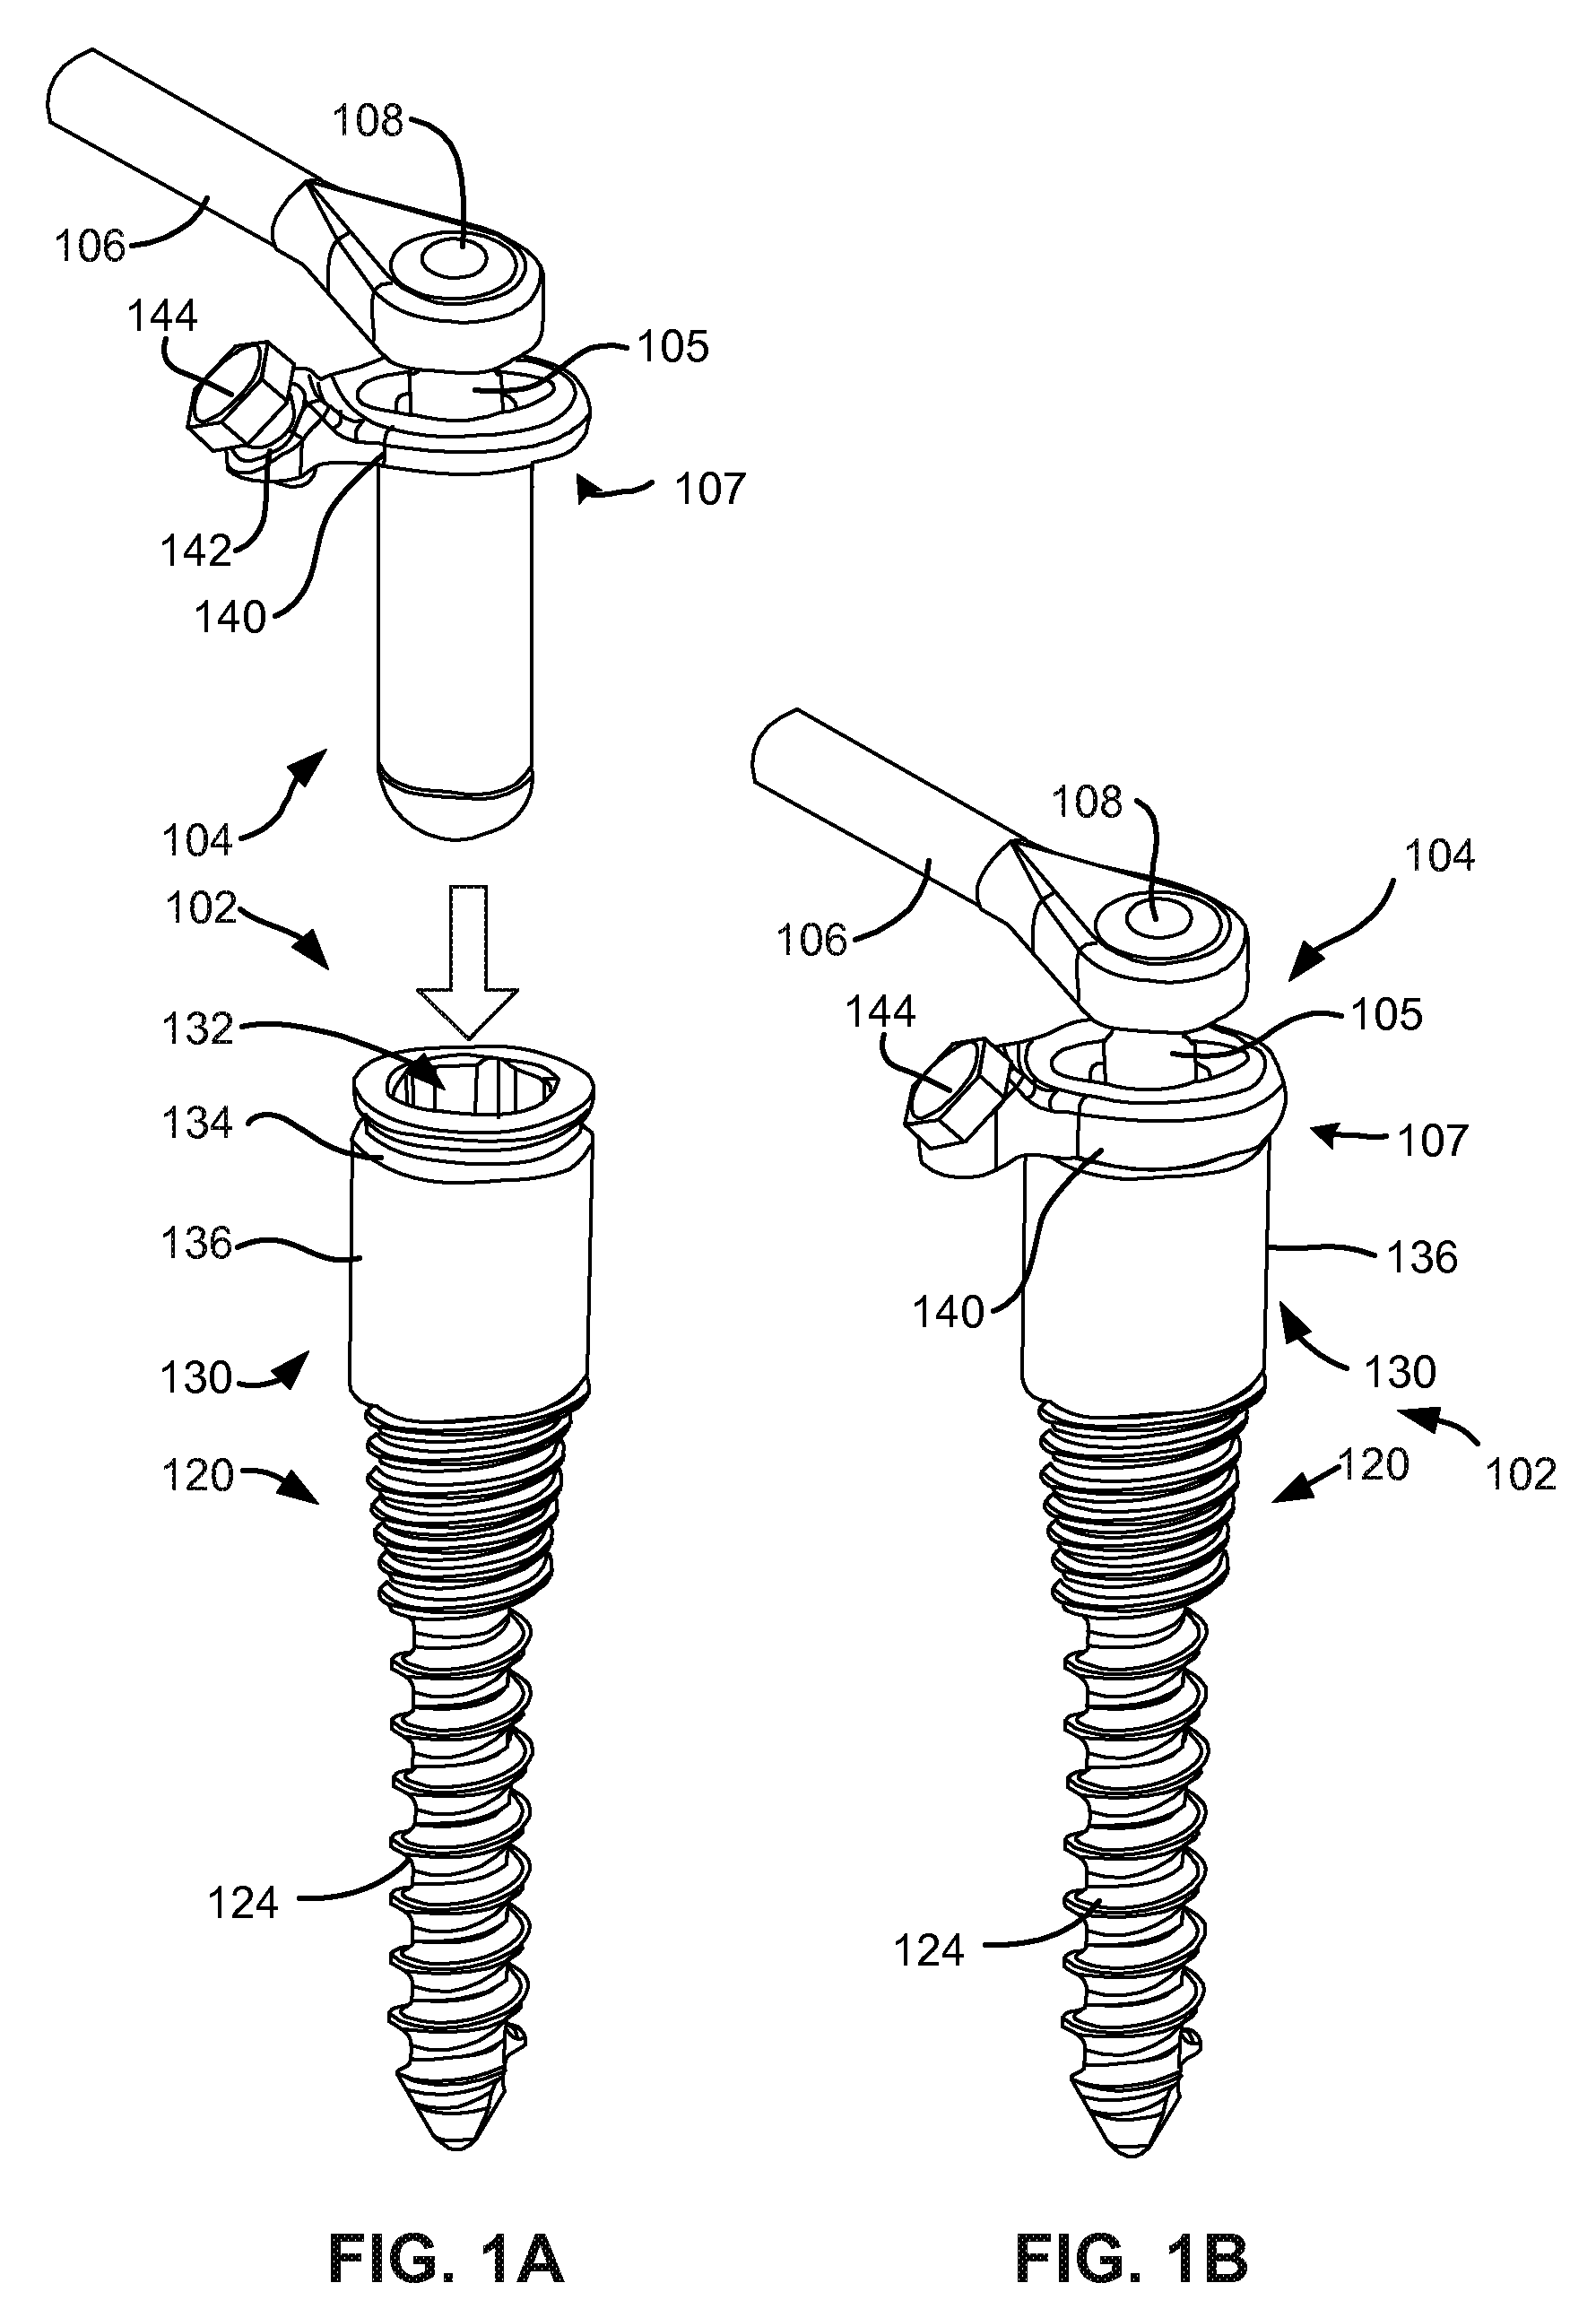 Load-sharing bone anchor having a durable compliant member and method for dynamic stabilization of the spine